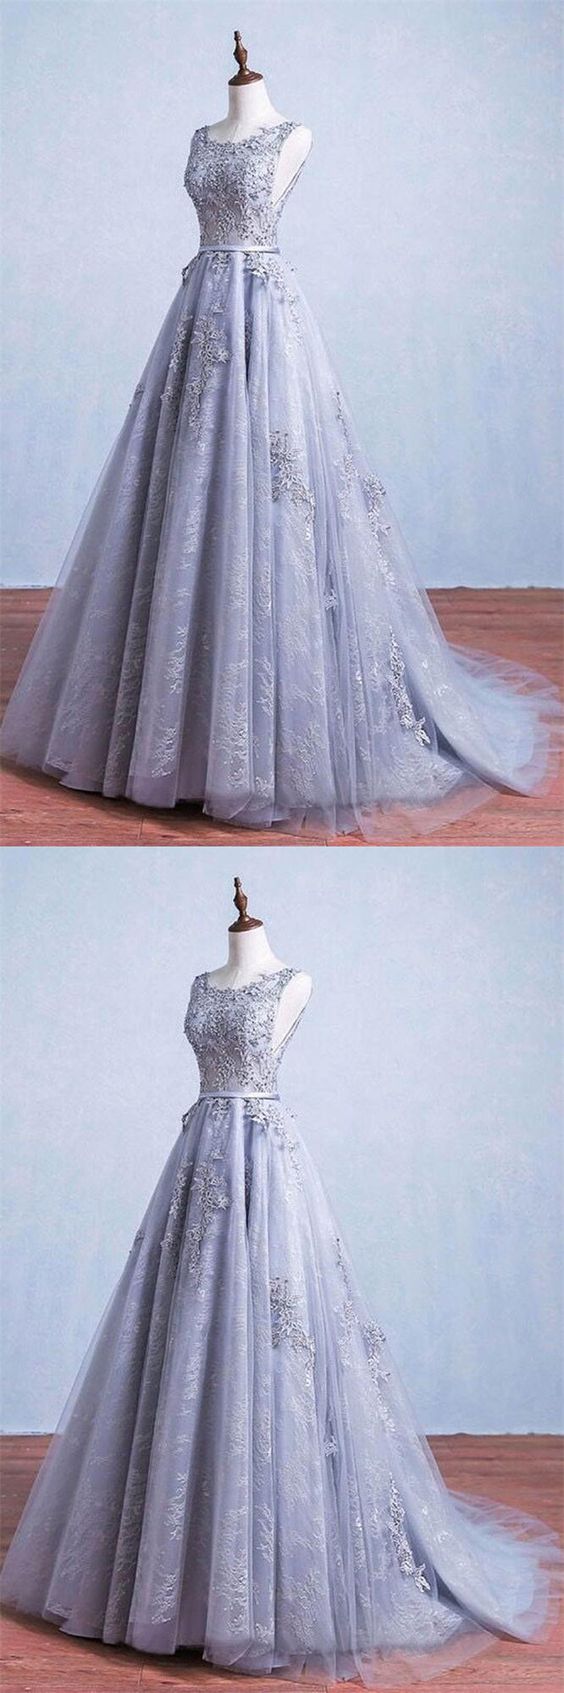 Princess Prom Dresses,Long Gray Lace Tulle Elegant Prom Dress For Teens,Quinceanera Dresses   cg11796